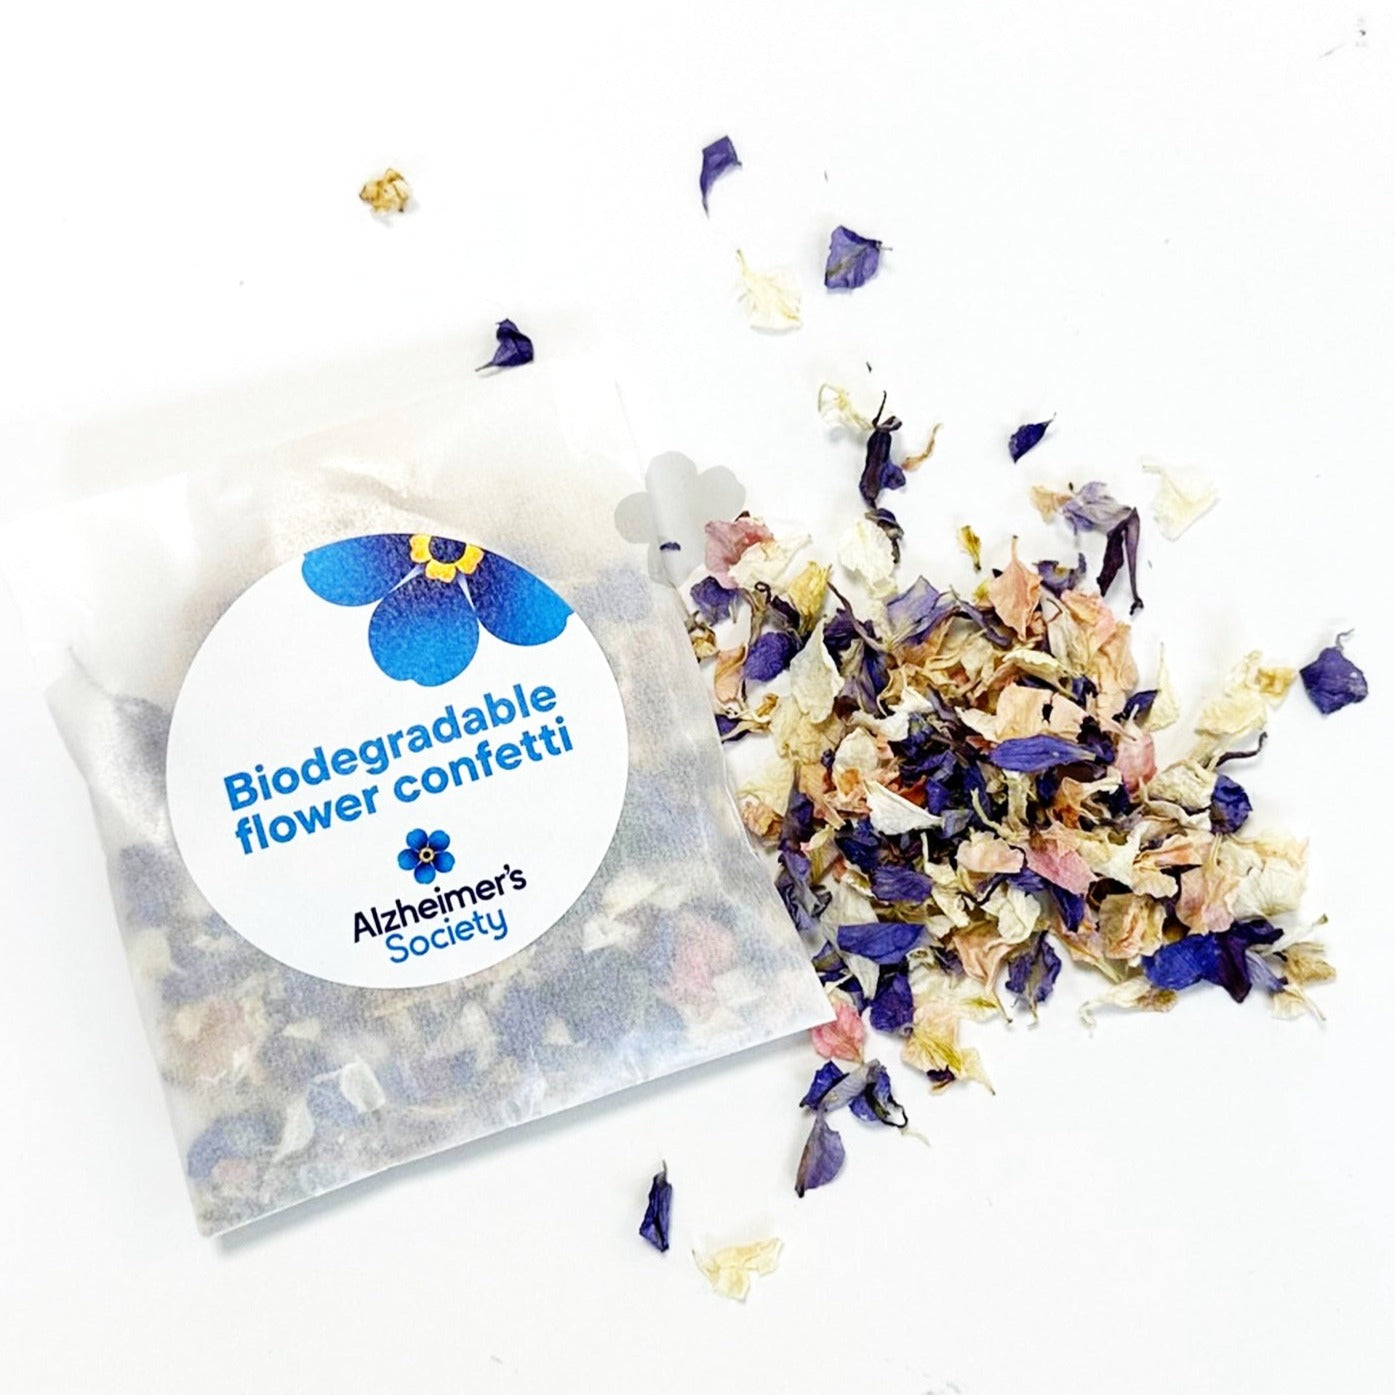 A paper bag which shows the contents of white, pink, blue dried delphinium flower confetti. A sticker on the bag says biodegradable flower confetti and has the Alzheimer's Society logo too.